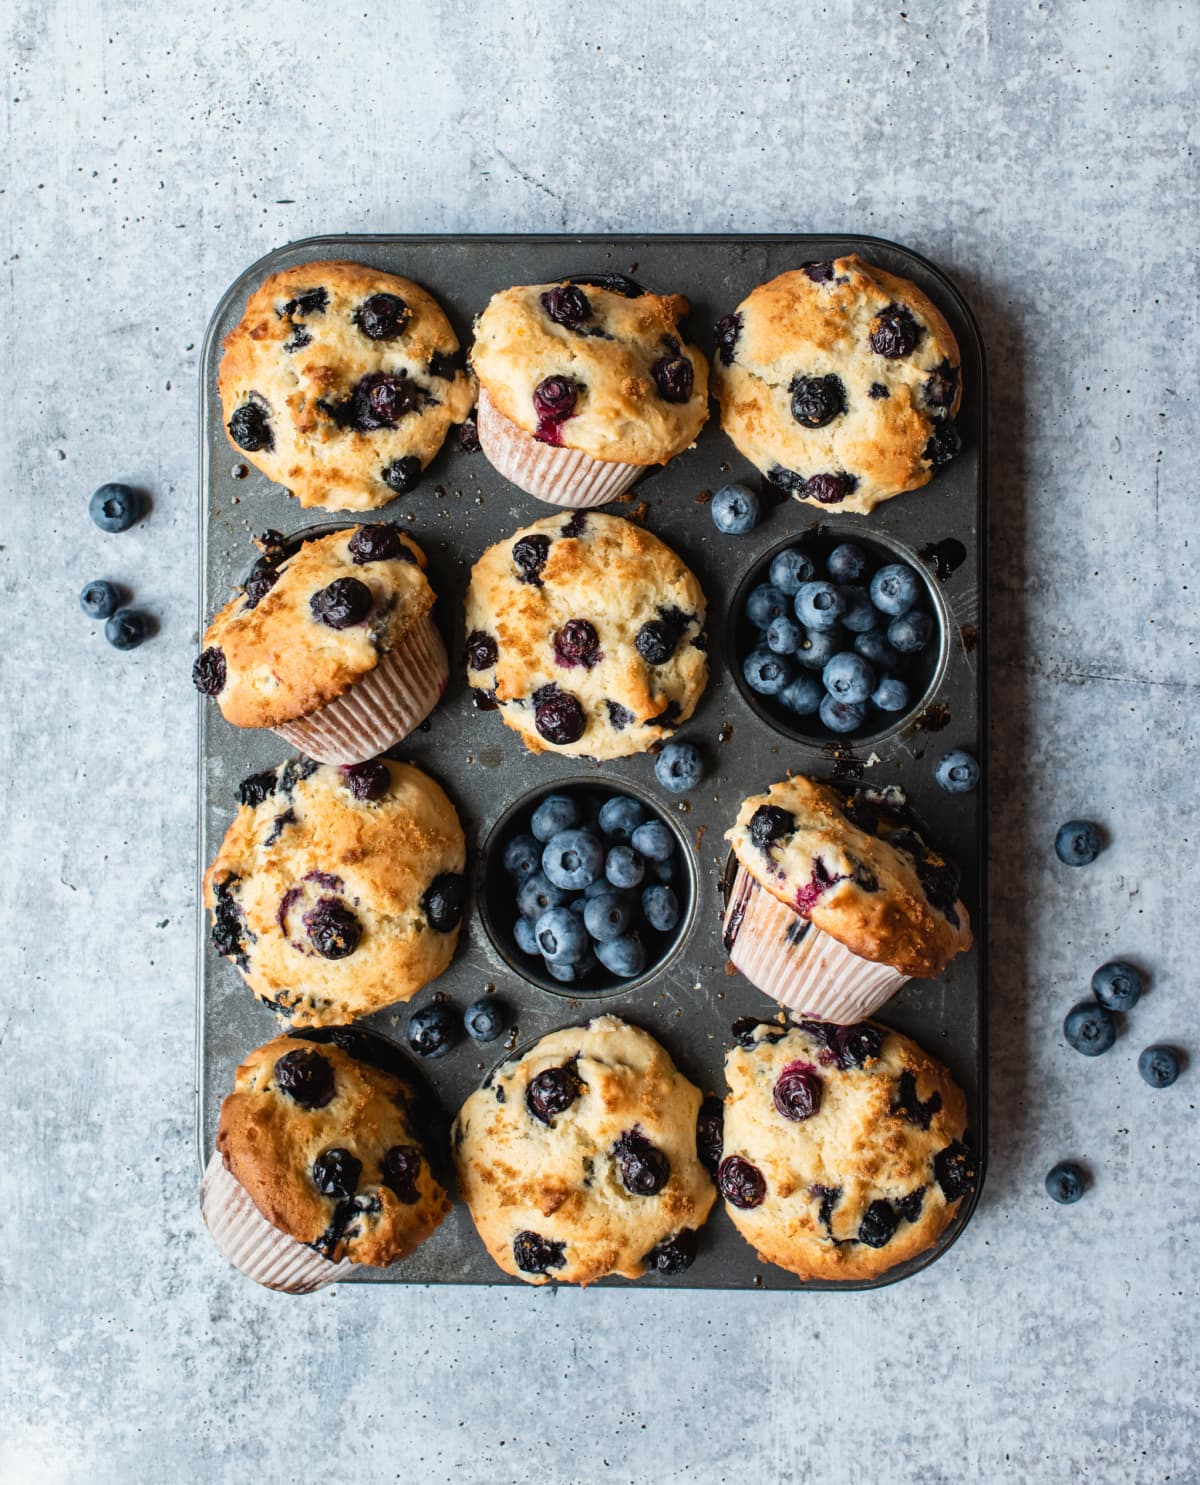 Muffins in a muffin pan with blueberries and some are tilted in odd directions